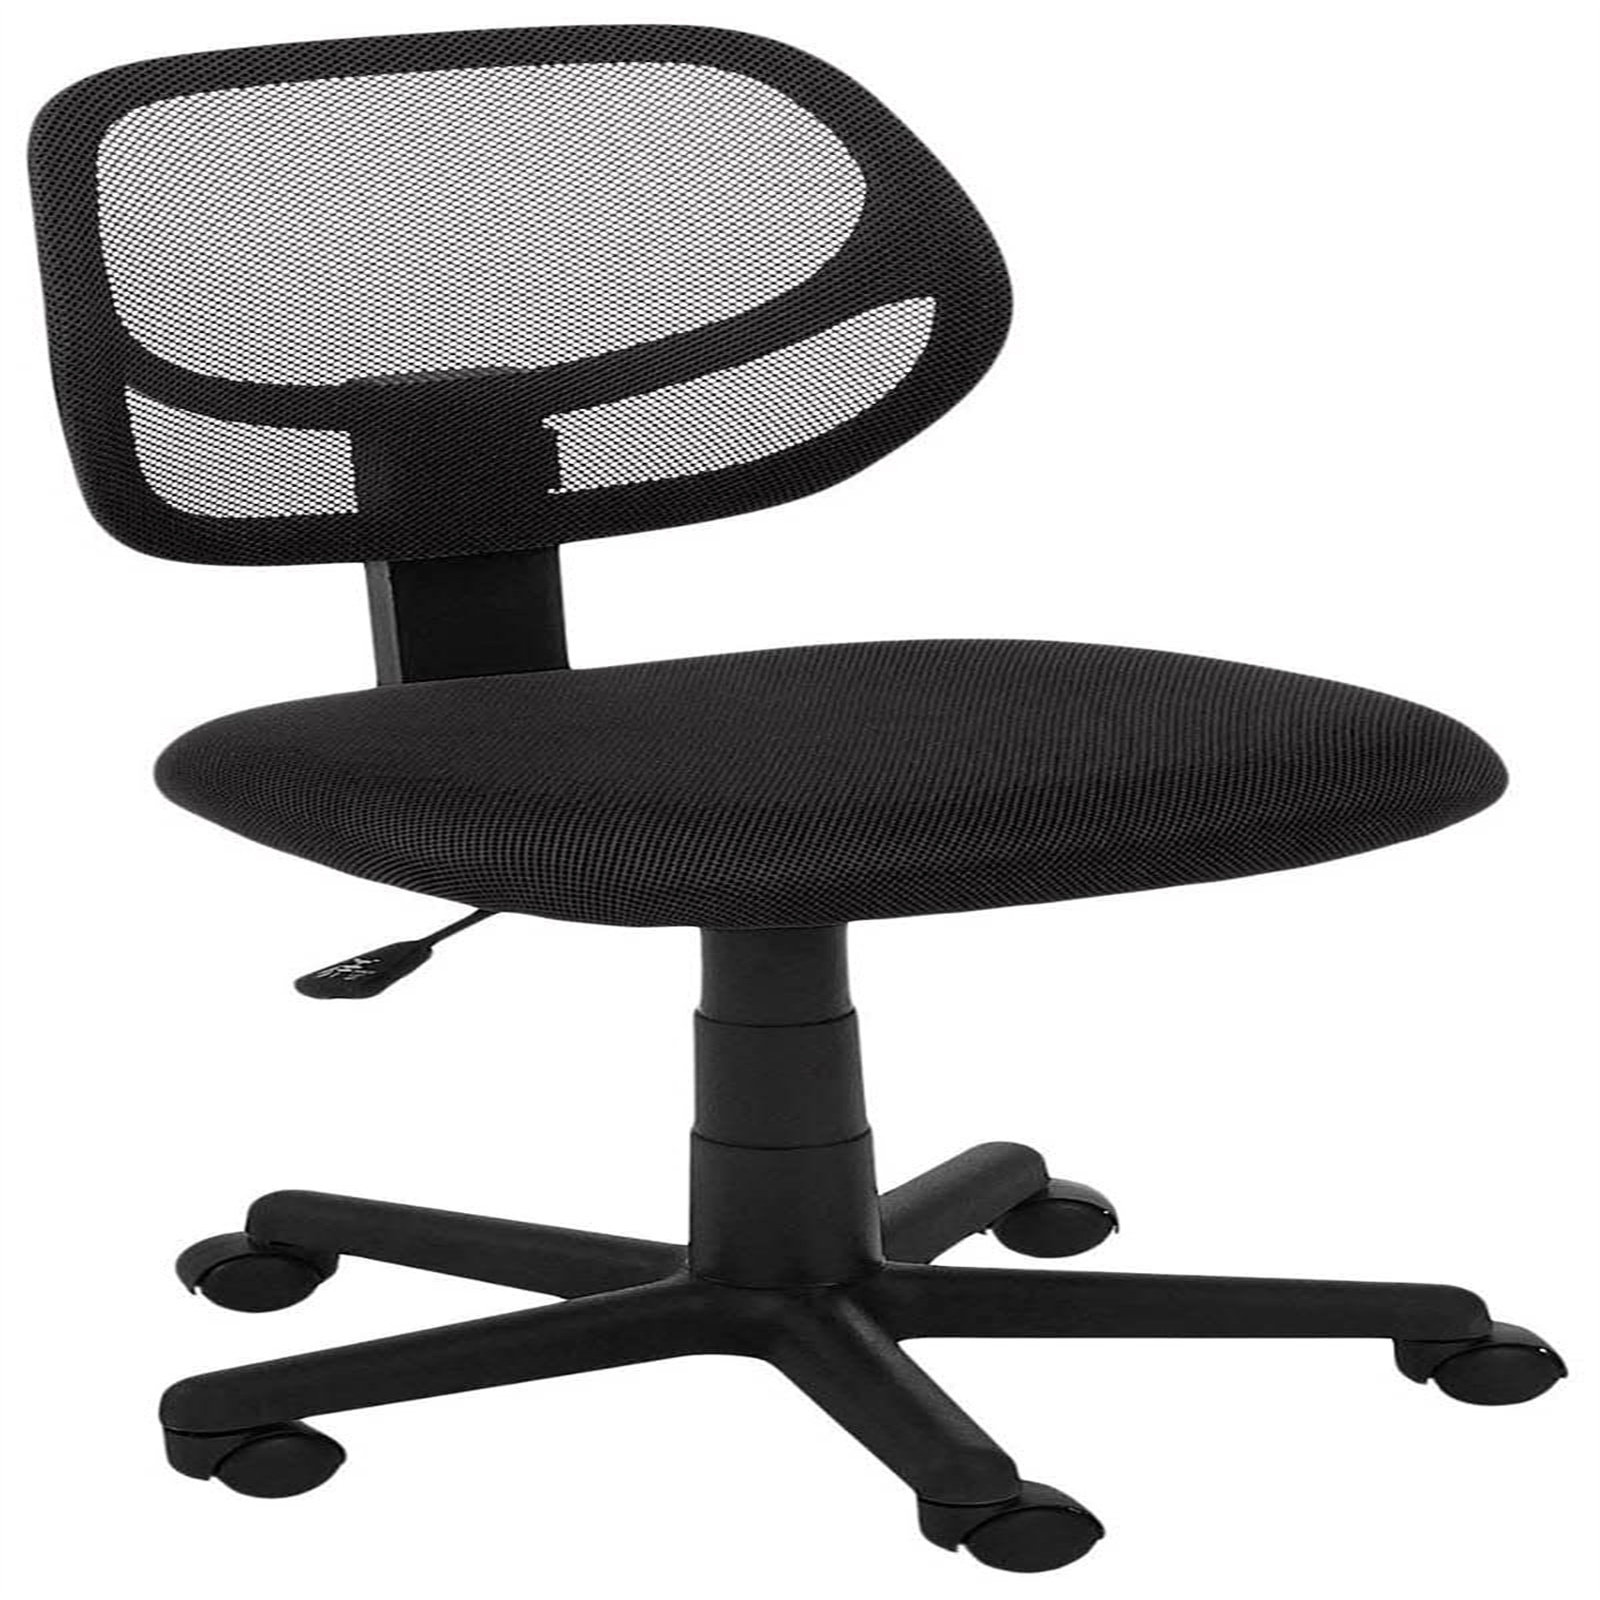   Basics Low-Back, Upholstered Mesh, Adjustable, Swivel Computer  Office Desk Chair, Black, 18.7D x 17.7W x 38.2H : Office Products